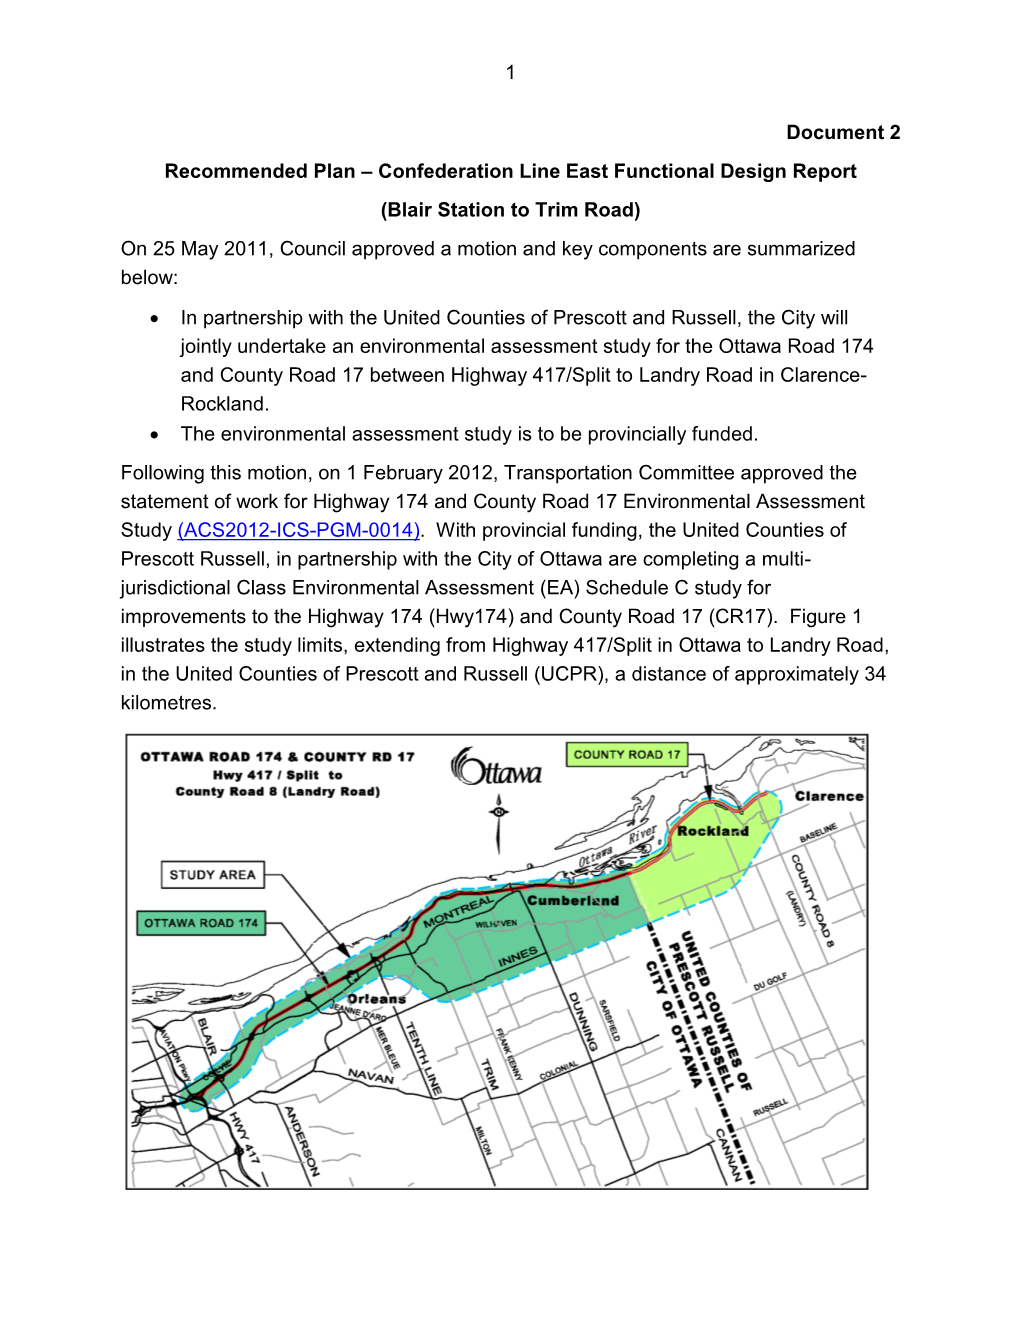 Confederation Line East Functional Design Report (Blair Station to Trim Road) on 25 May 2011, Council Approved a Motion and Key Components Are Summarized Below